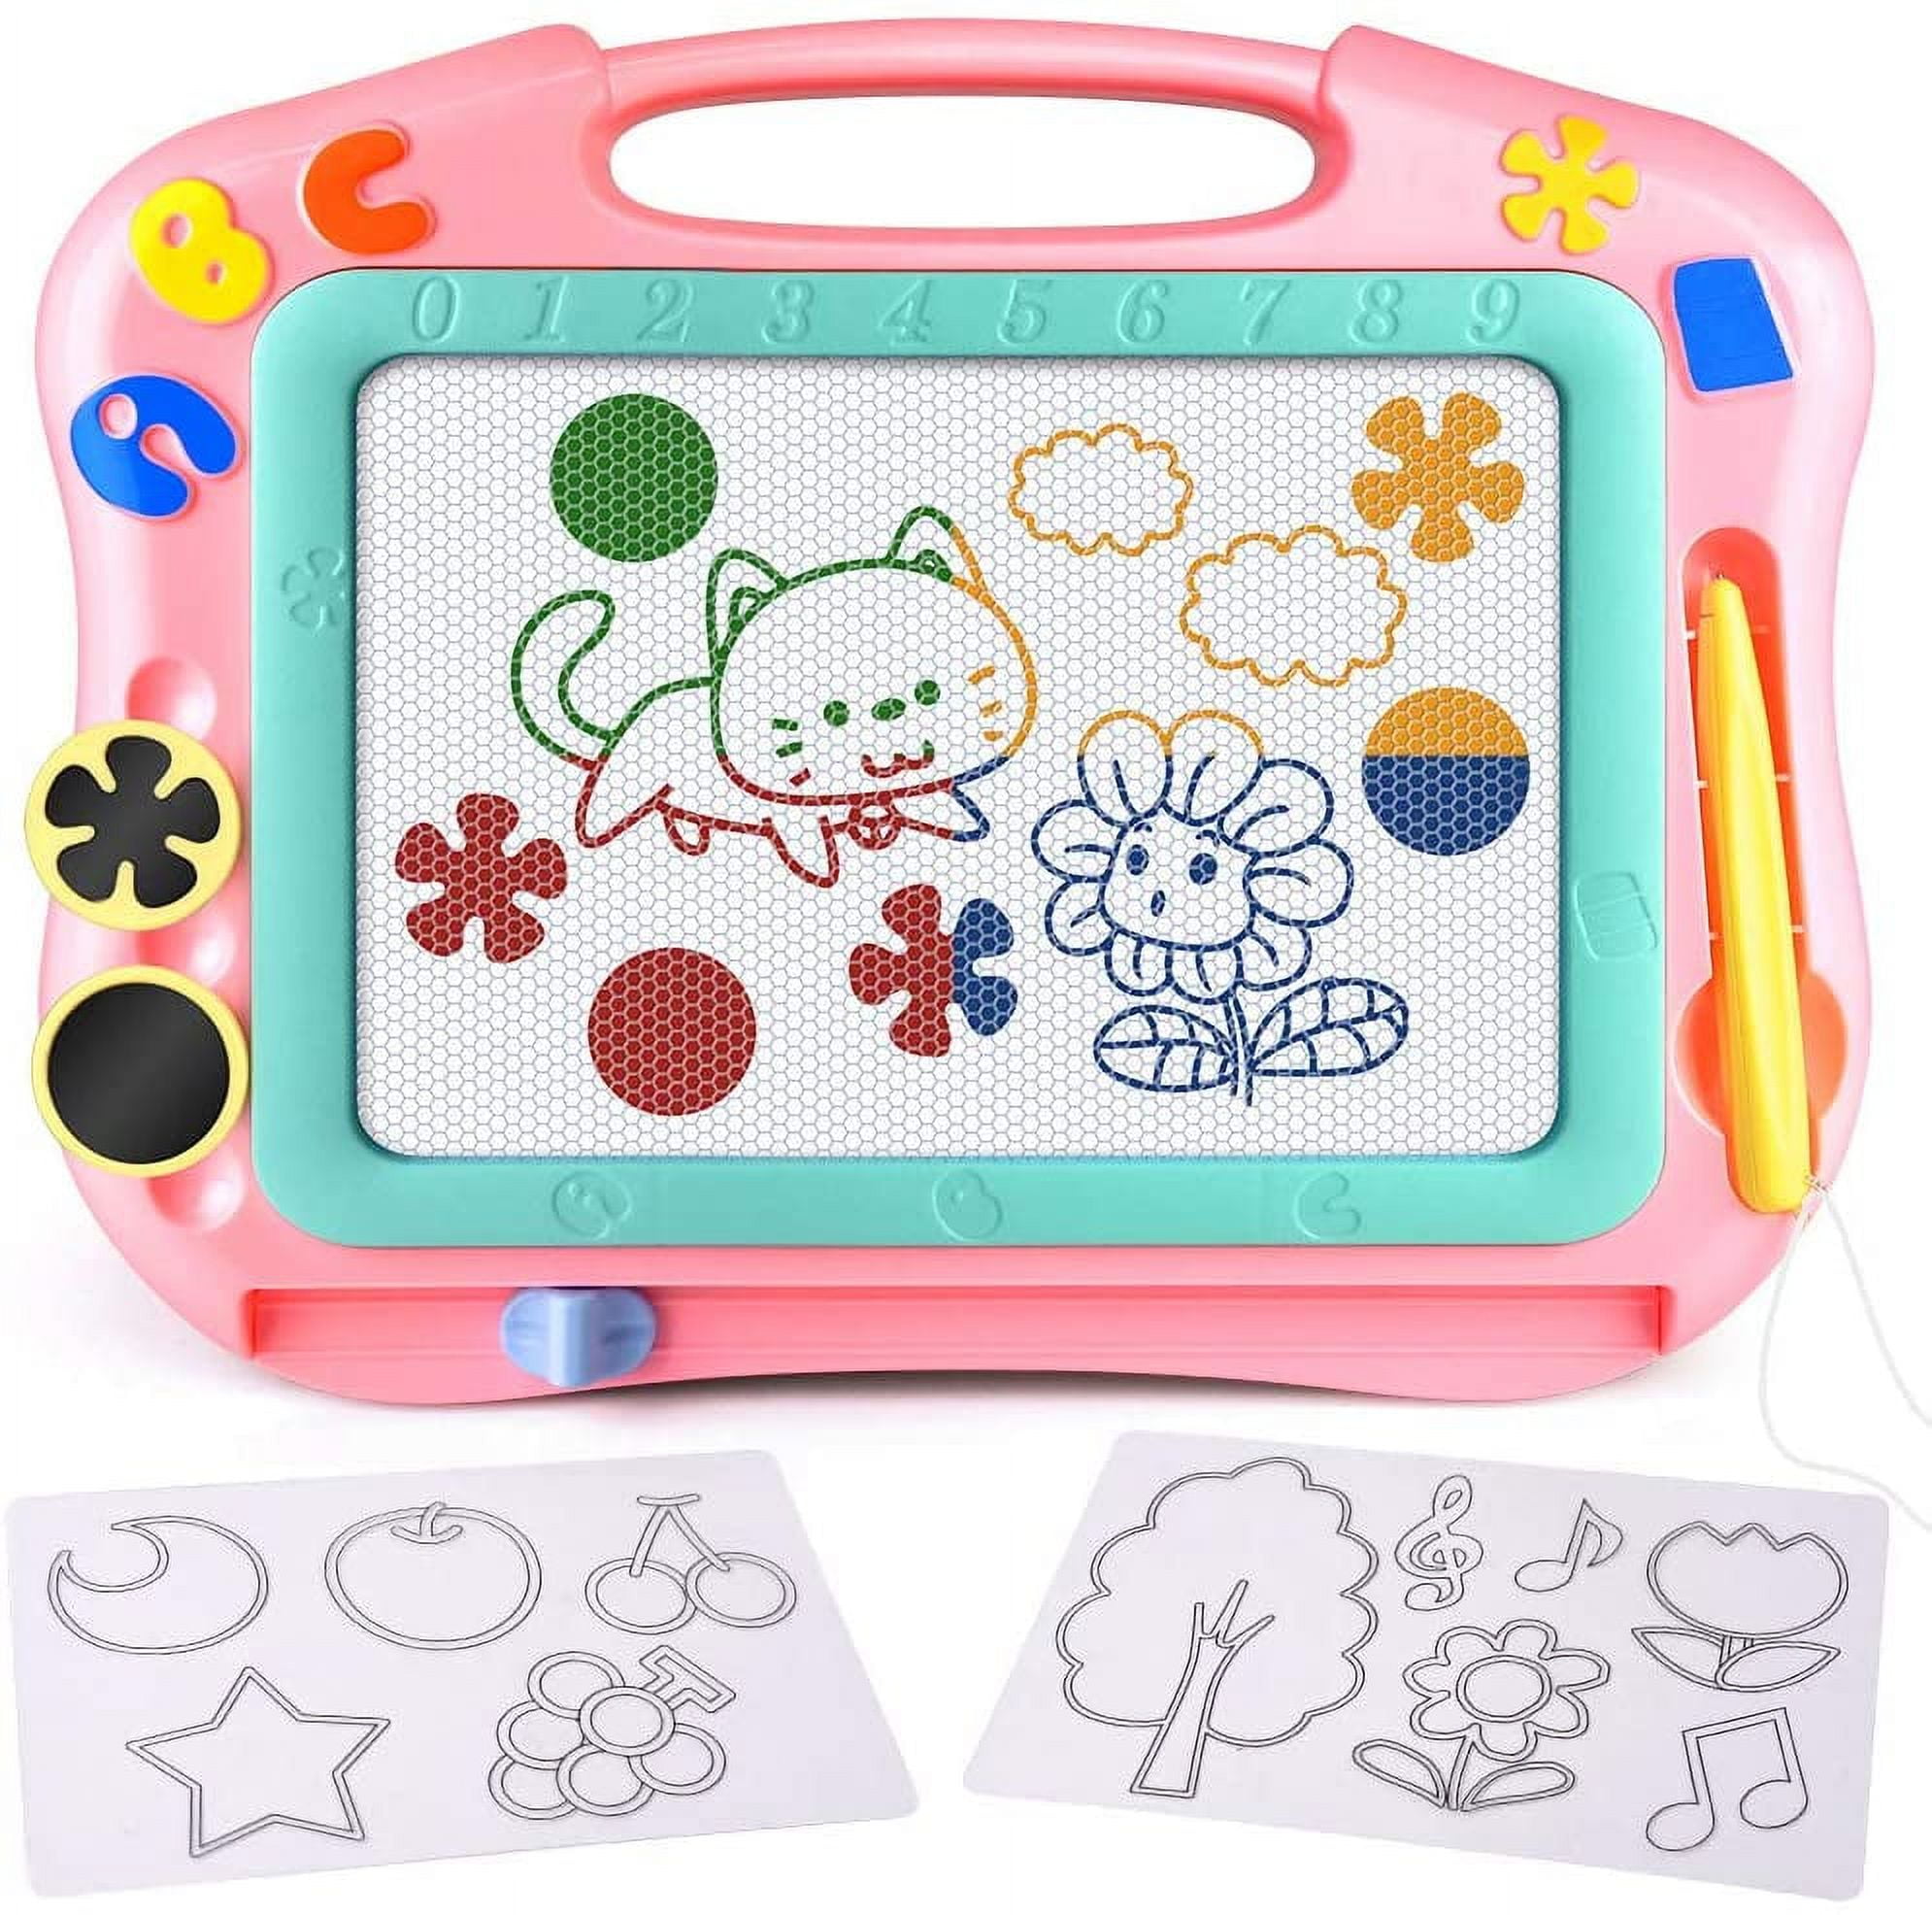 2 x Magic Writer Magnetic Writing Drawing Slate Board Doodle Pad Kids Gift  Toy